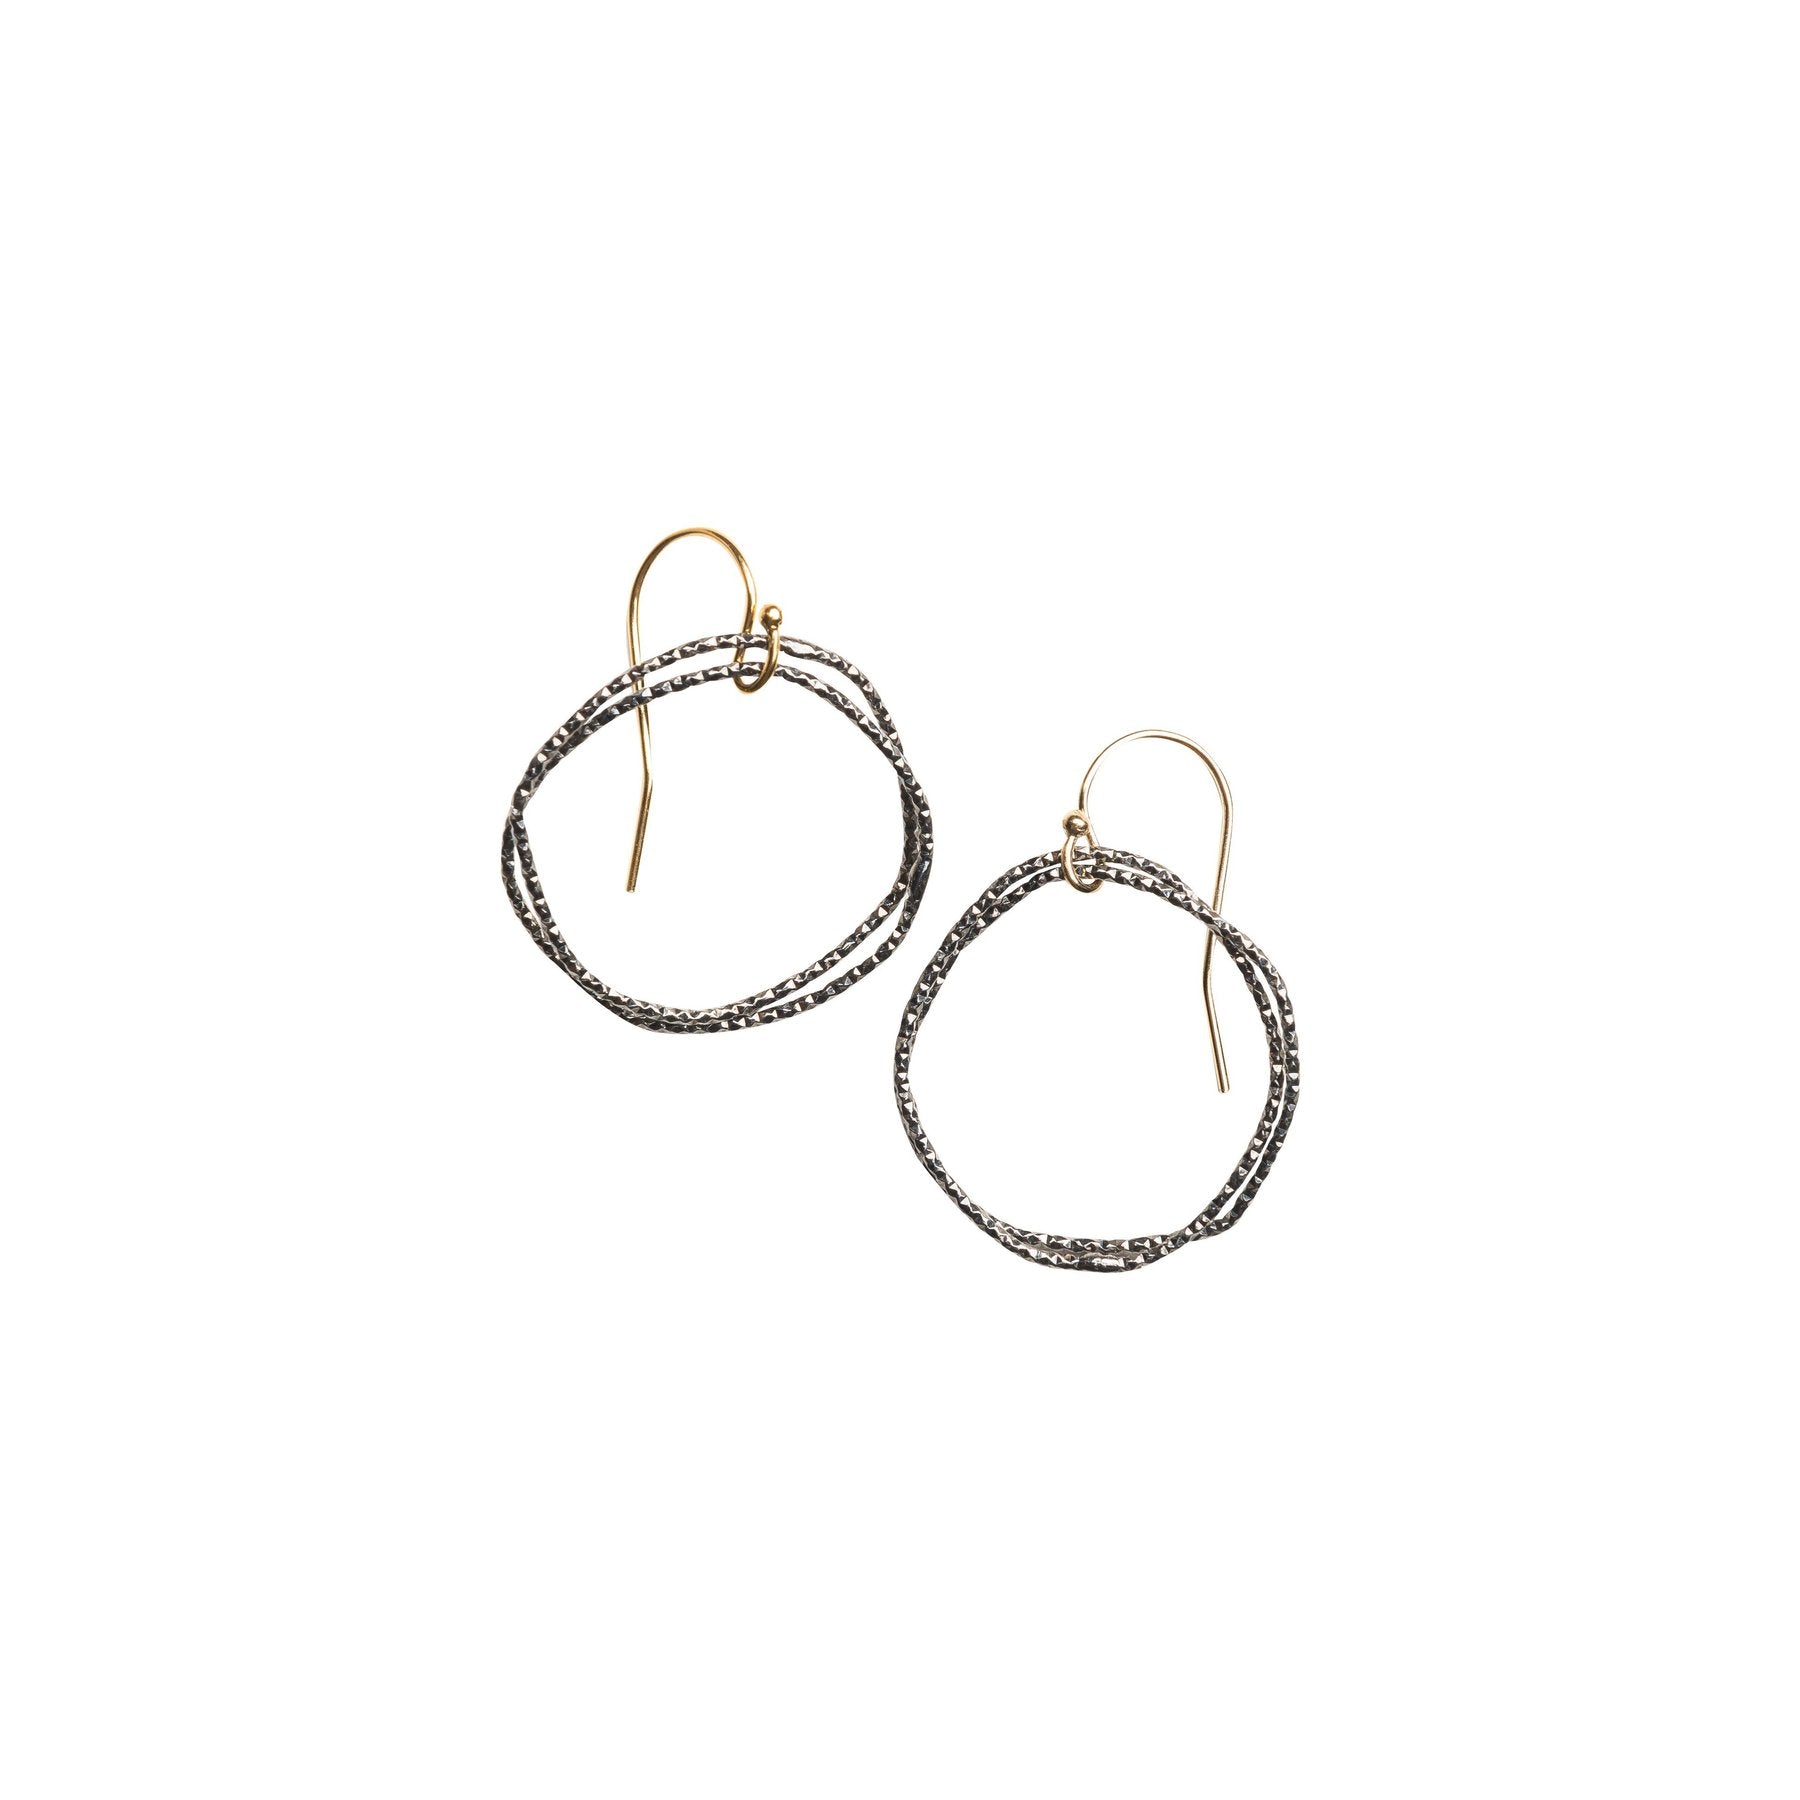 Oxidized Sterling Organic Circle Earrings by Original Hardware